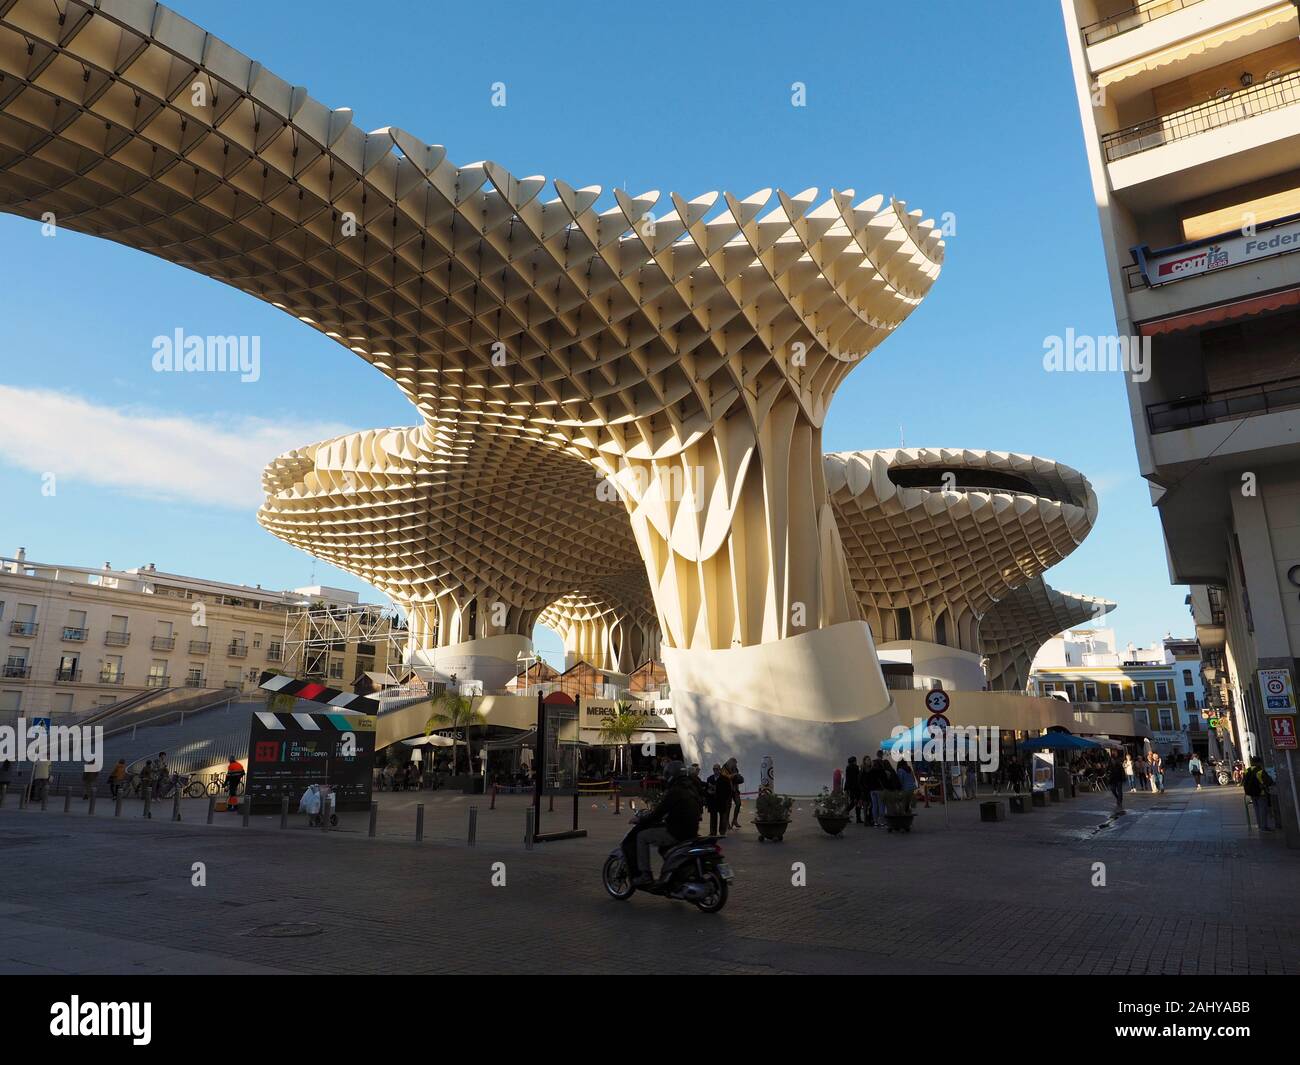 The Parasol Metropol in the city center of Seville, Andalusia, Spain, is the largest wooden construction in the world. It provides shade on the ground Stock Photo